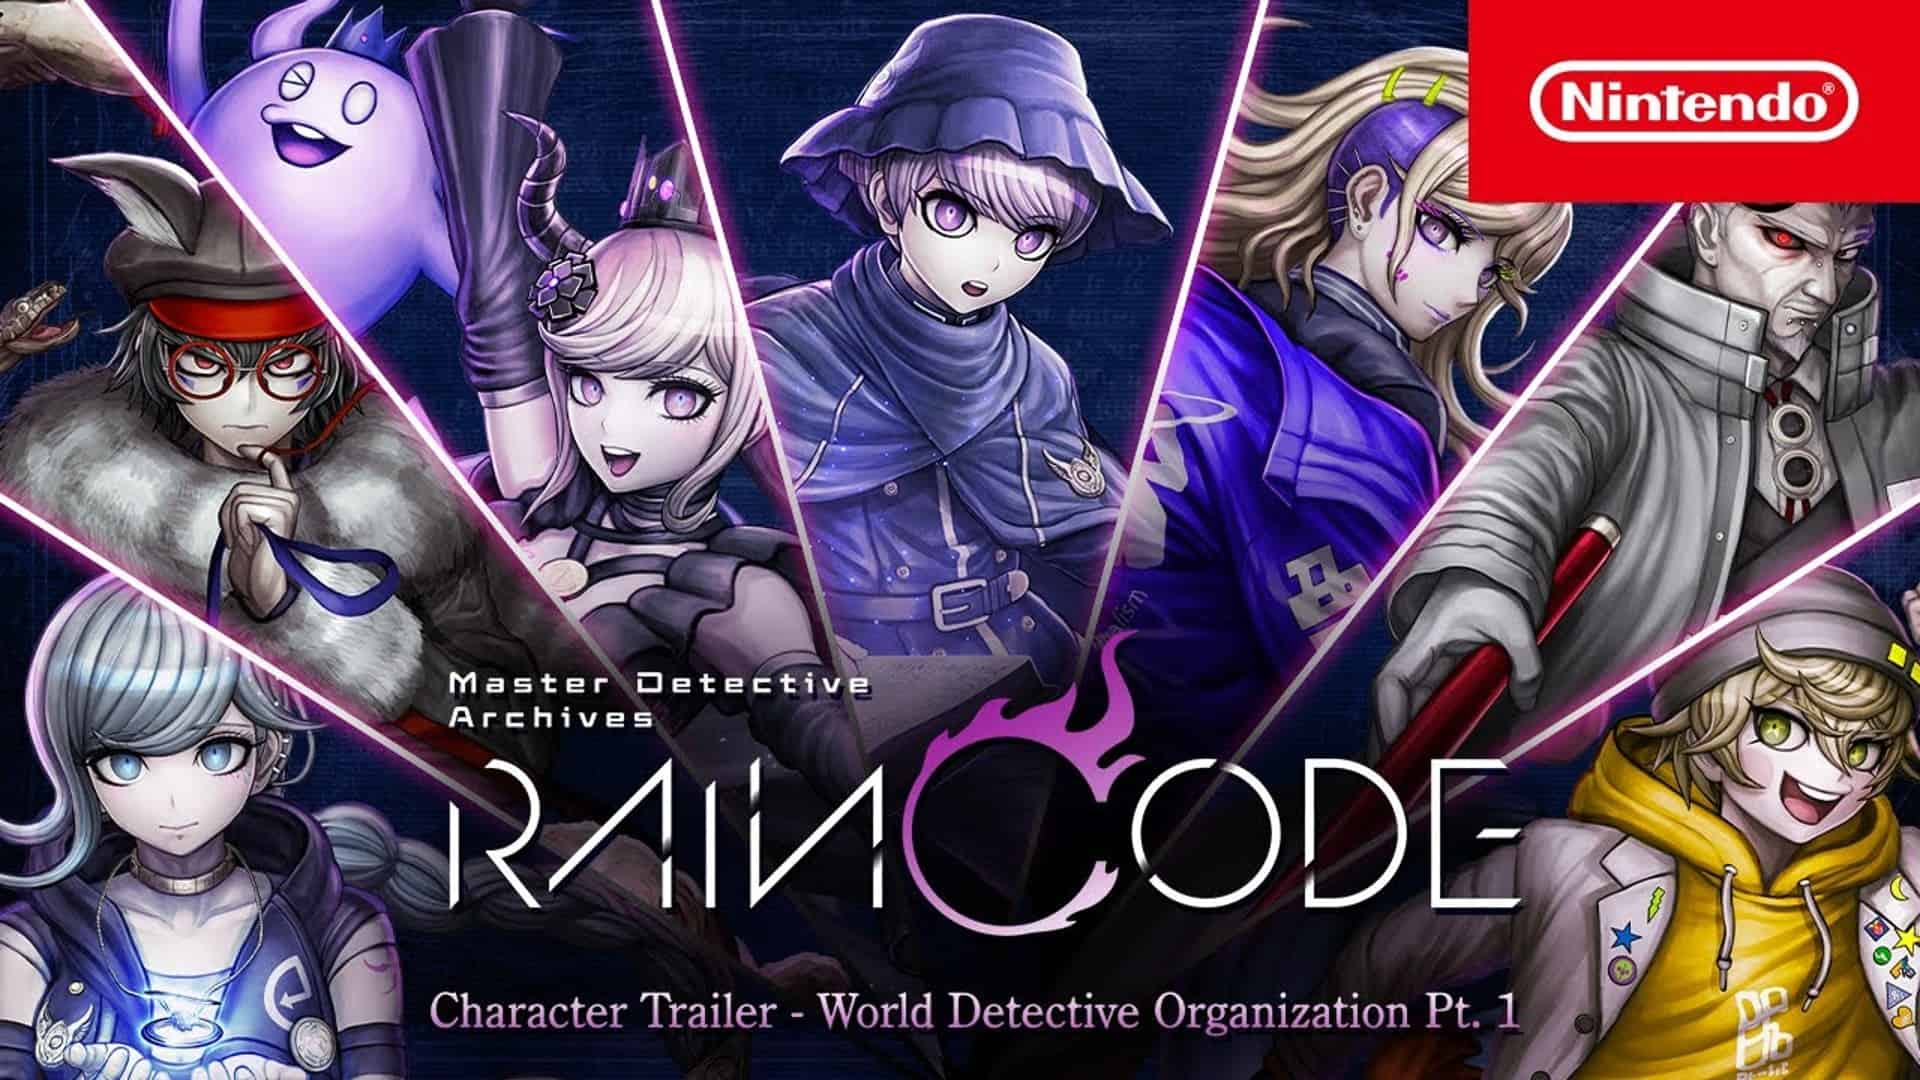 The cover art of the Master Detective Archives: RAIN CODE trailer